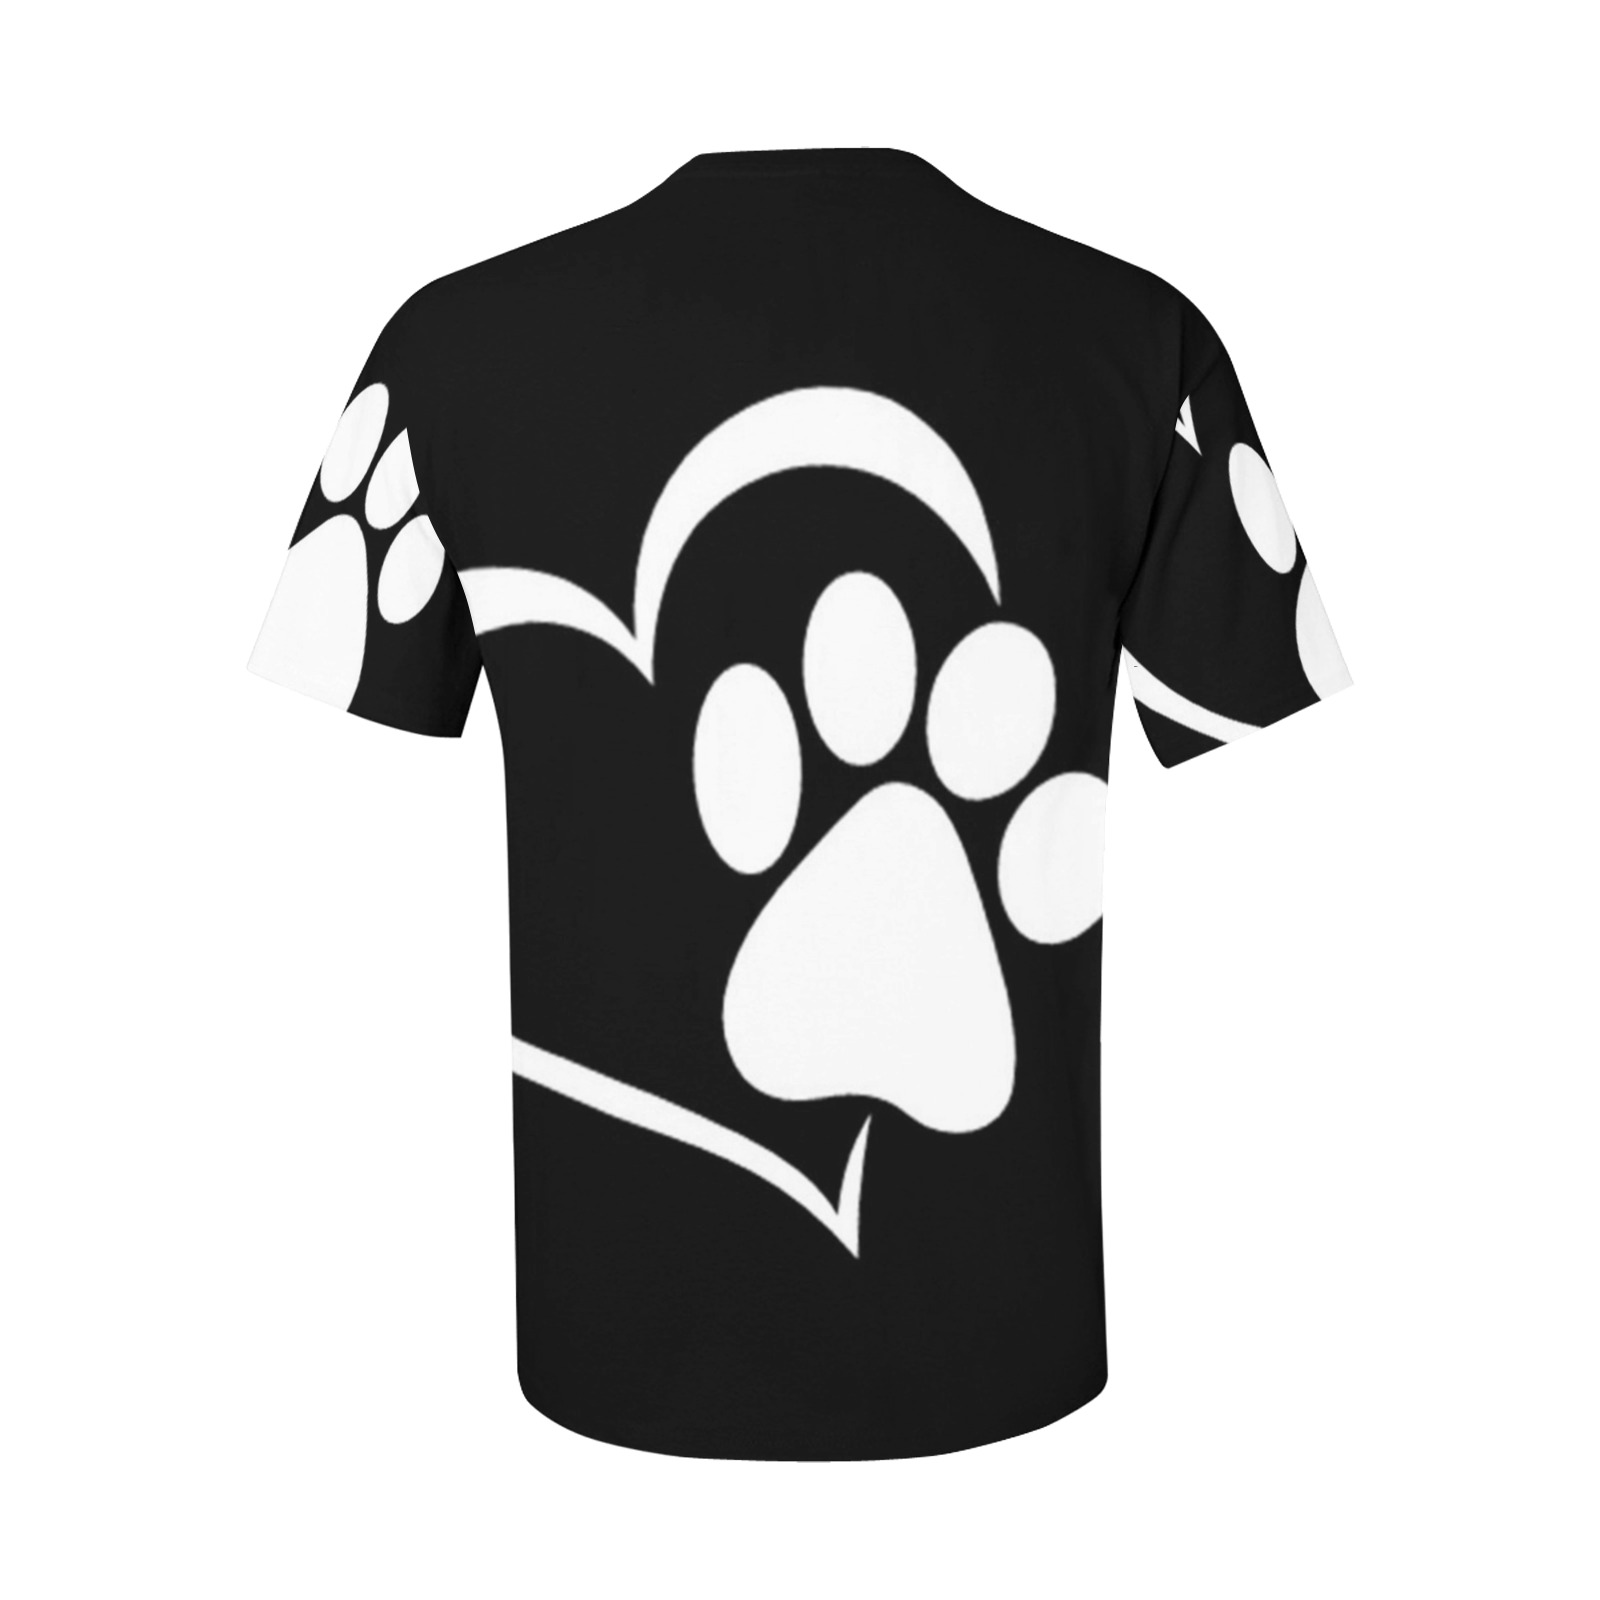 Puppy Paws Black by Fetishworld Men's All Over Print T-Shirt with Chest Pocket (Model T56)